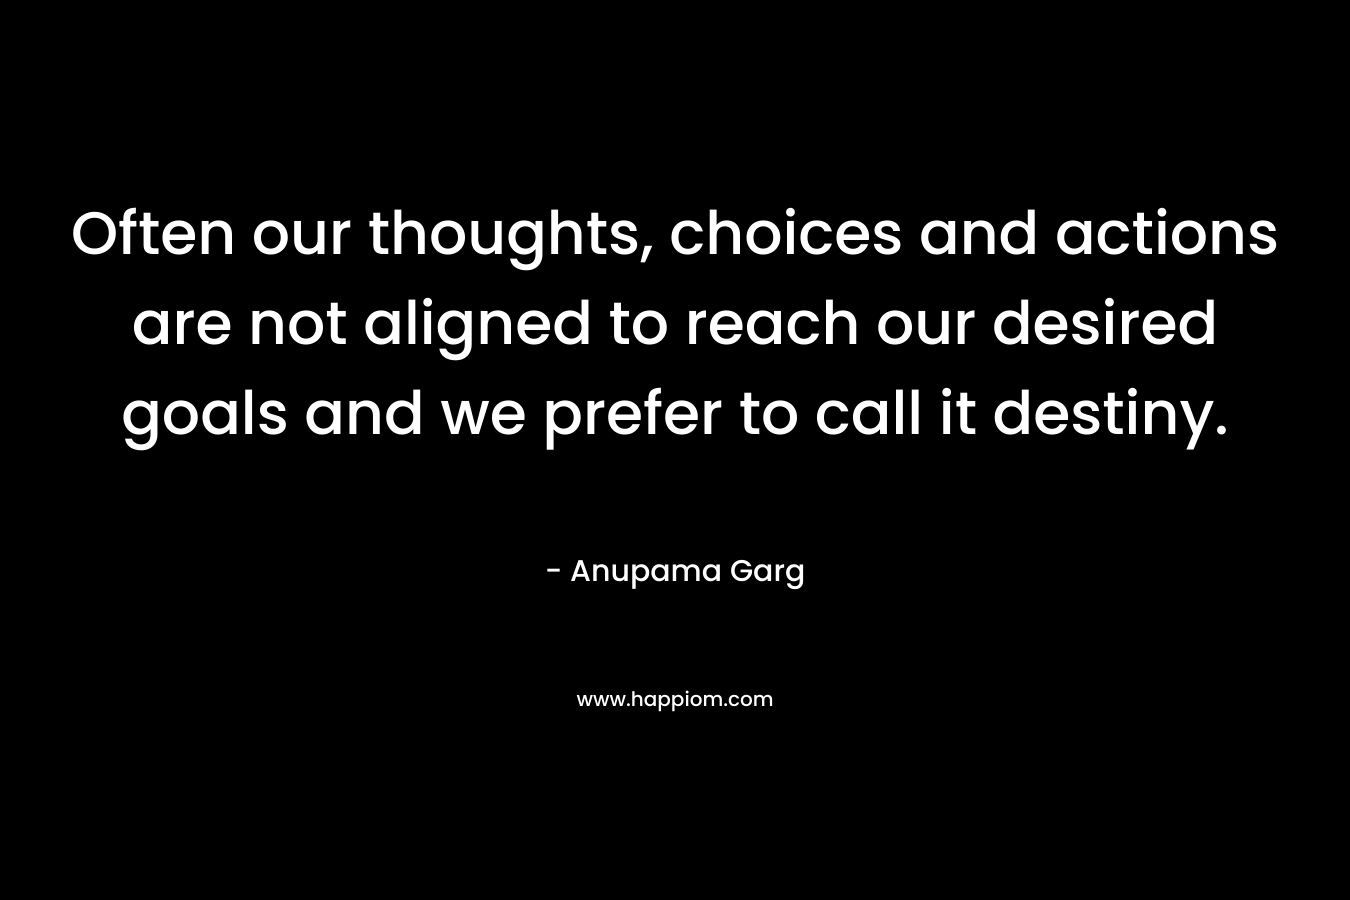 Often our thoughts, choices and actions are not aligned to reach our desired goals and we prefer to call it destiny.